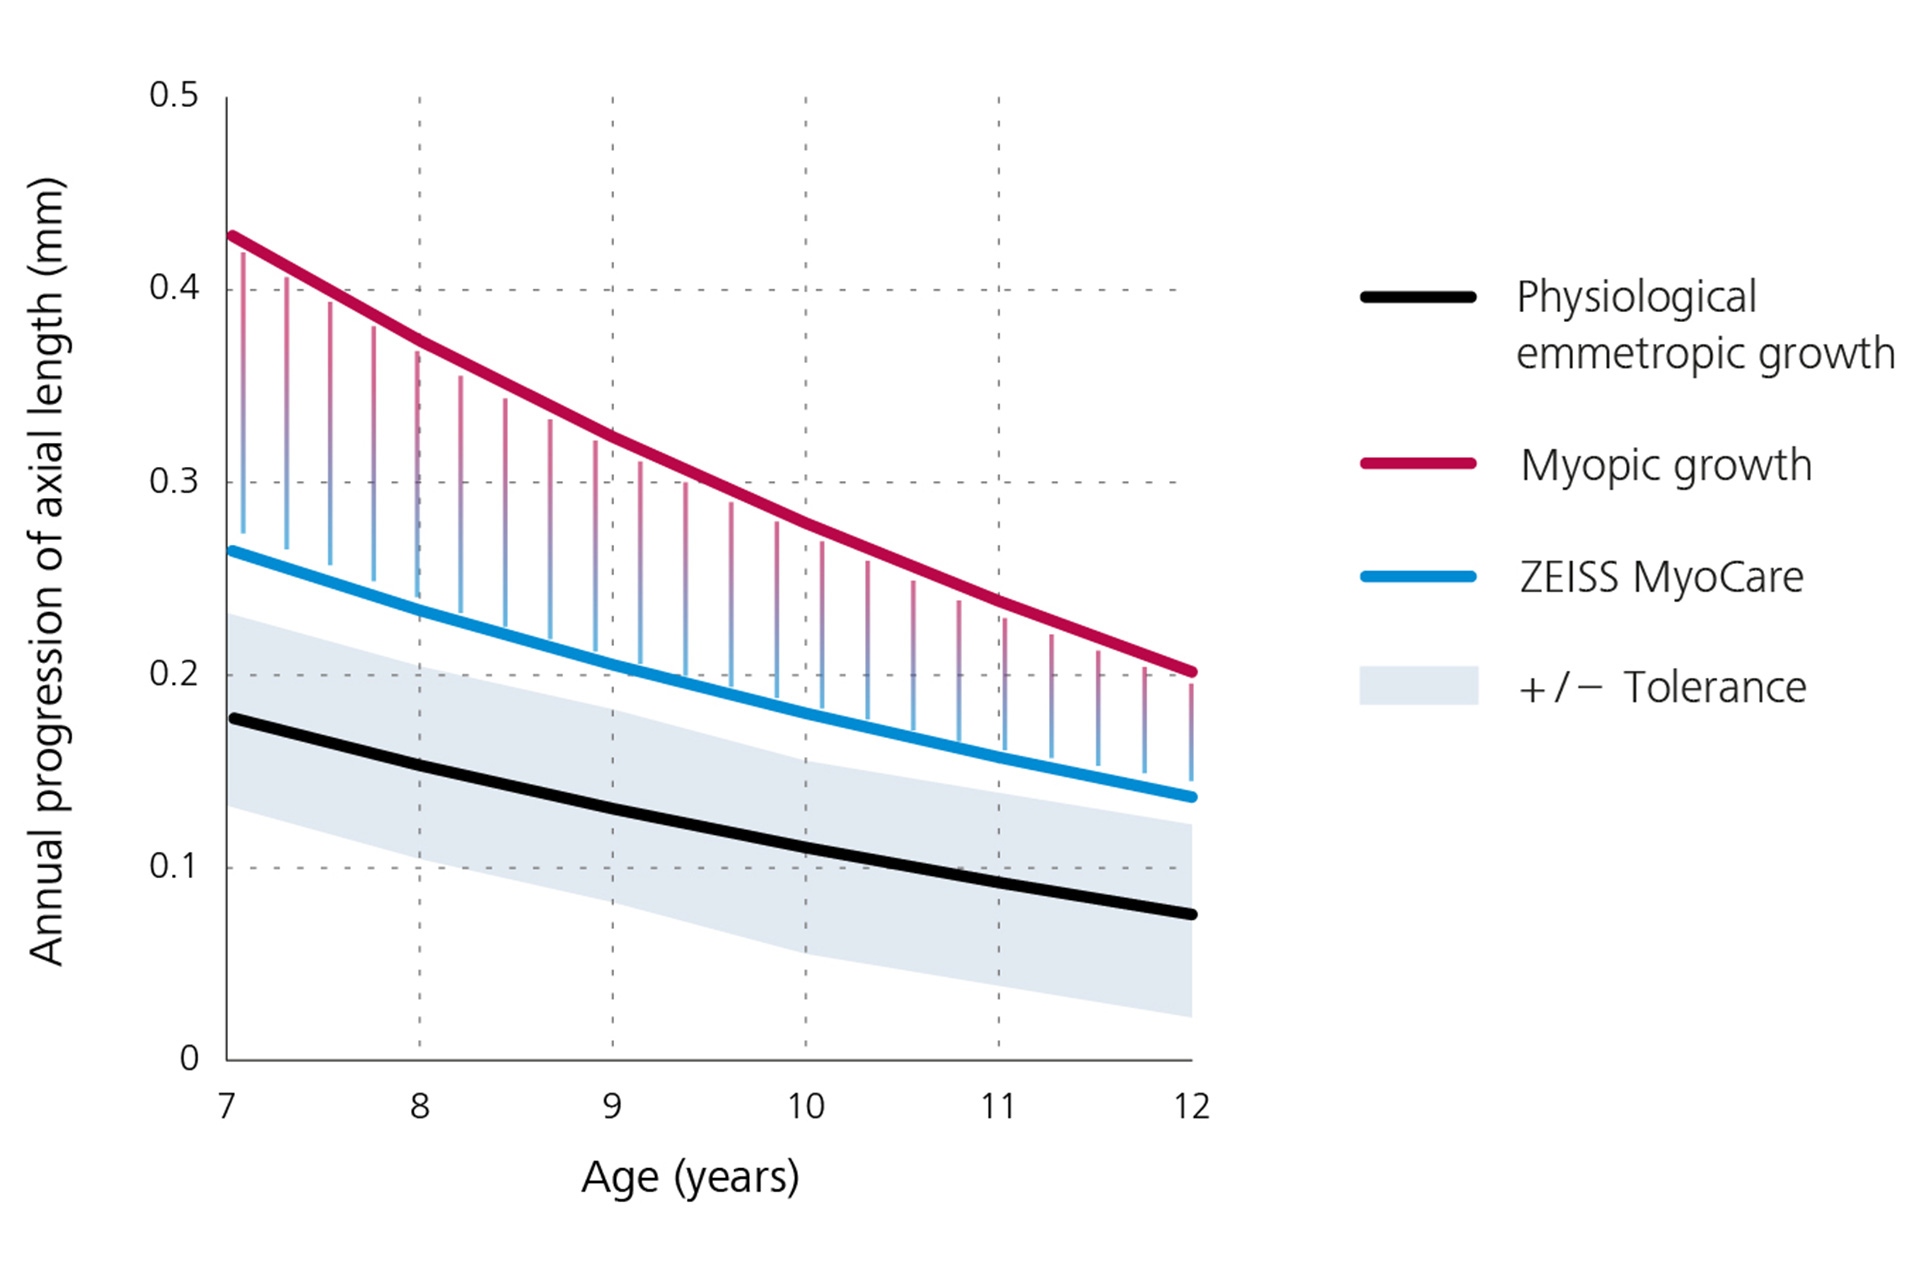 A line graph that displays annual progression of axial length showing physiological emmetropic growth in black at the bottom, myopic growth in red on top, and the results for ZEISS MyoCare lenses in blue in the middle. From this graph it can be deduced that myopia progression is below the myopic growth curve if ZEISS MyoCare lenses are worn.  